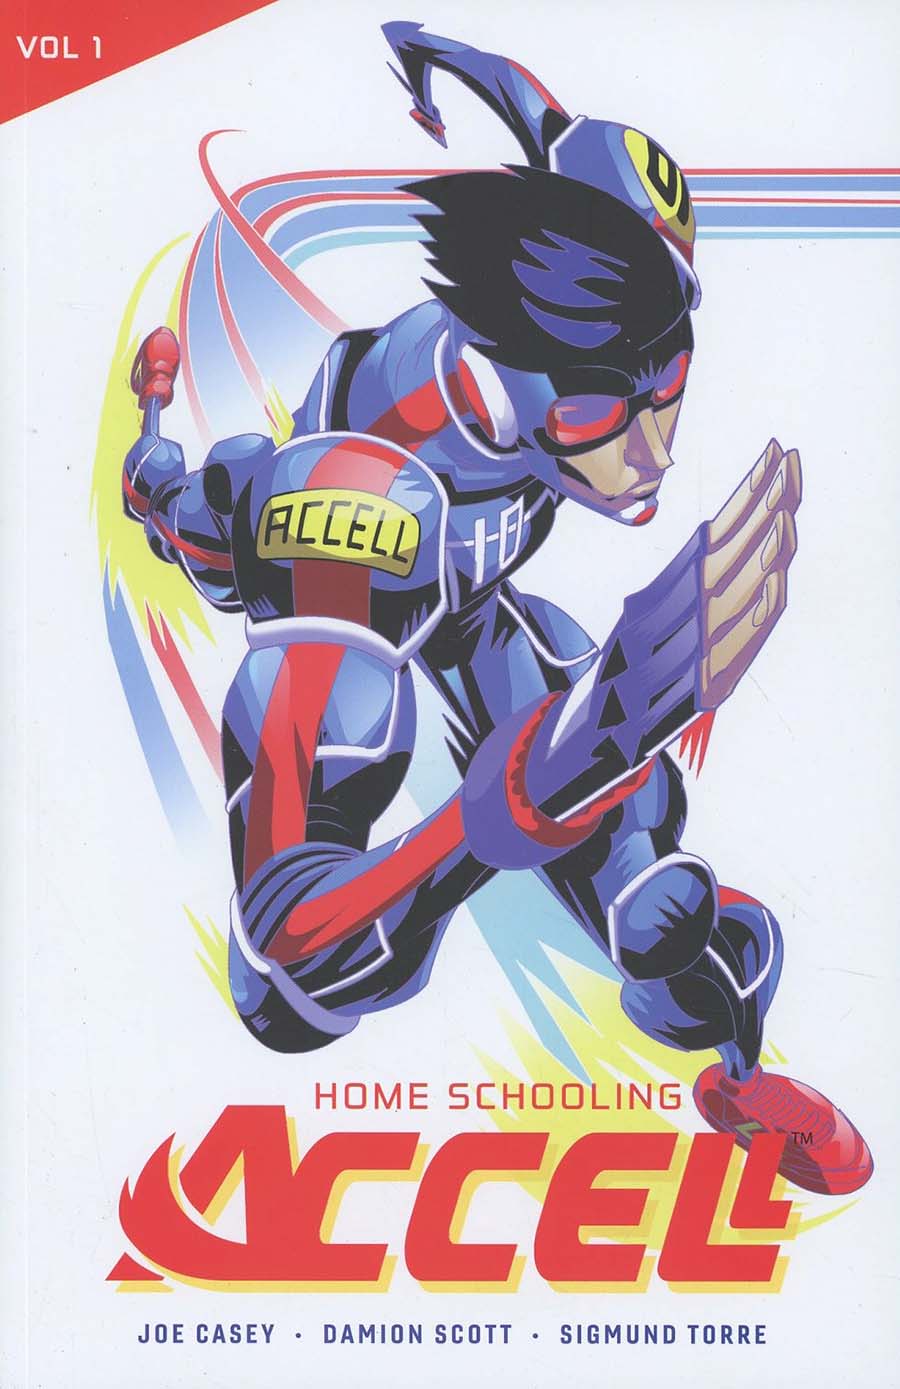 Catalyst Prime Accell Vol 1 Home Schooling TP